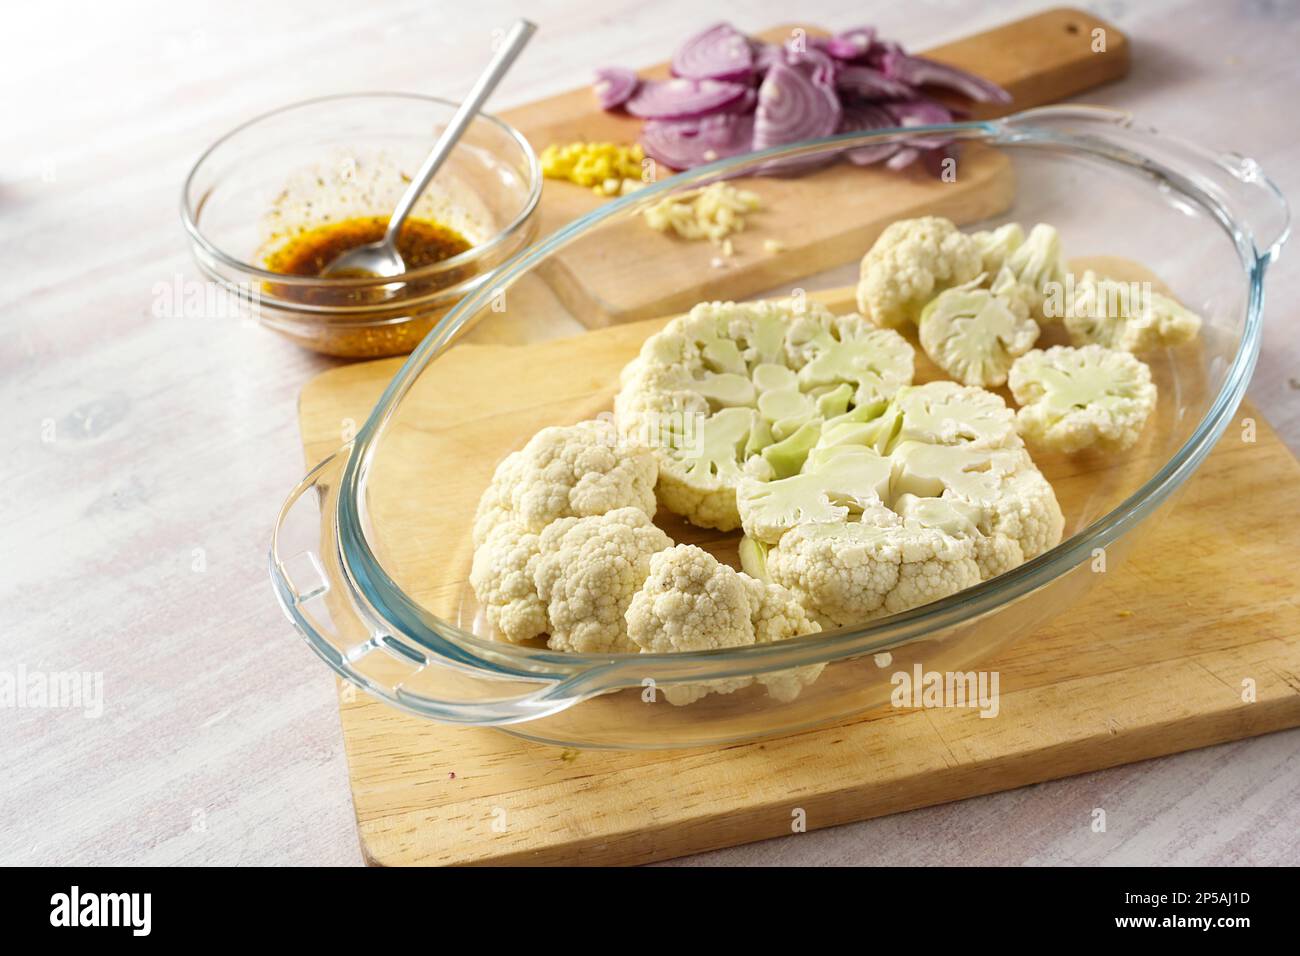 Raw cauliflower slices in a glass casserole, chopped red onion and a spice mix in olive oil, cooking preparation for baked vegetable steaks, copy spac Stock Photo